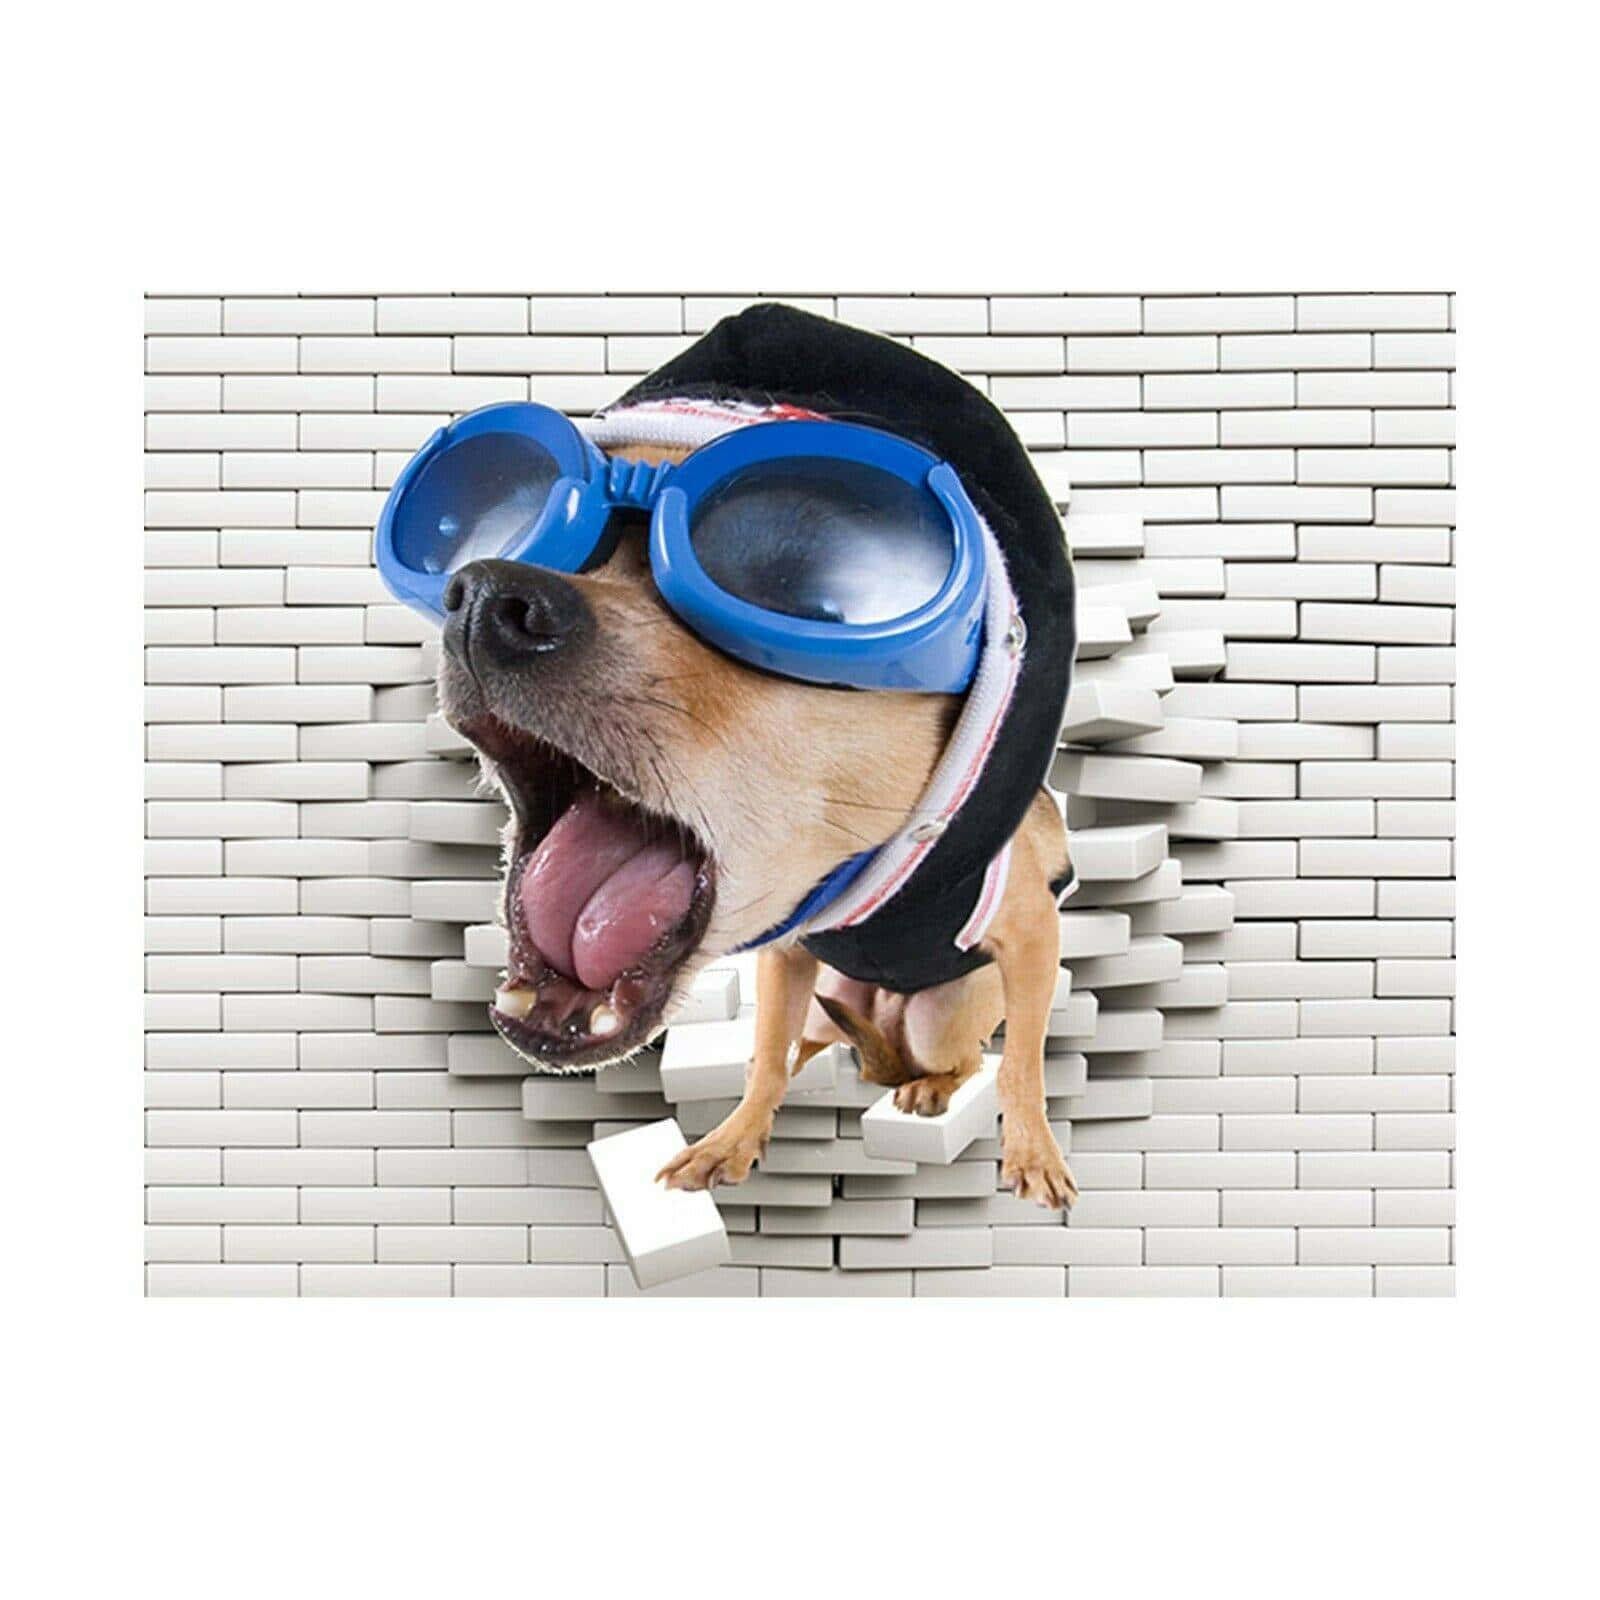 A Dog Wearing Goggles And A Helmet